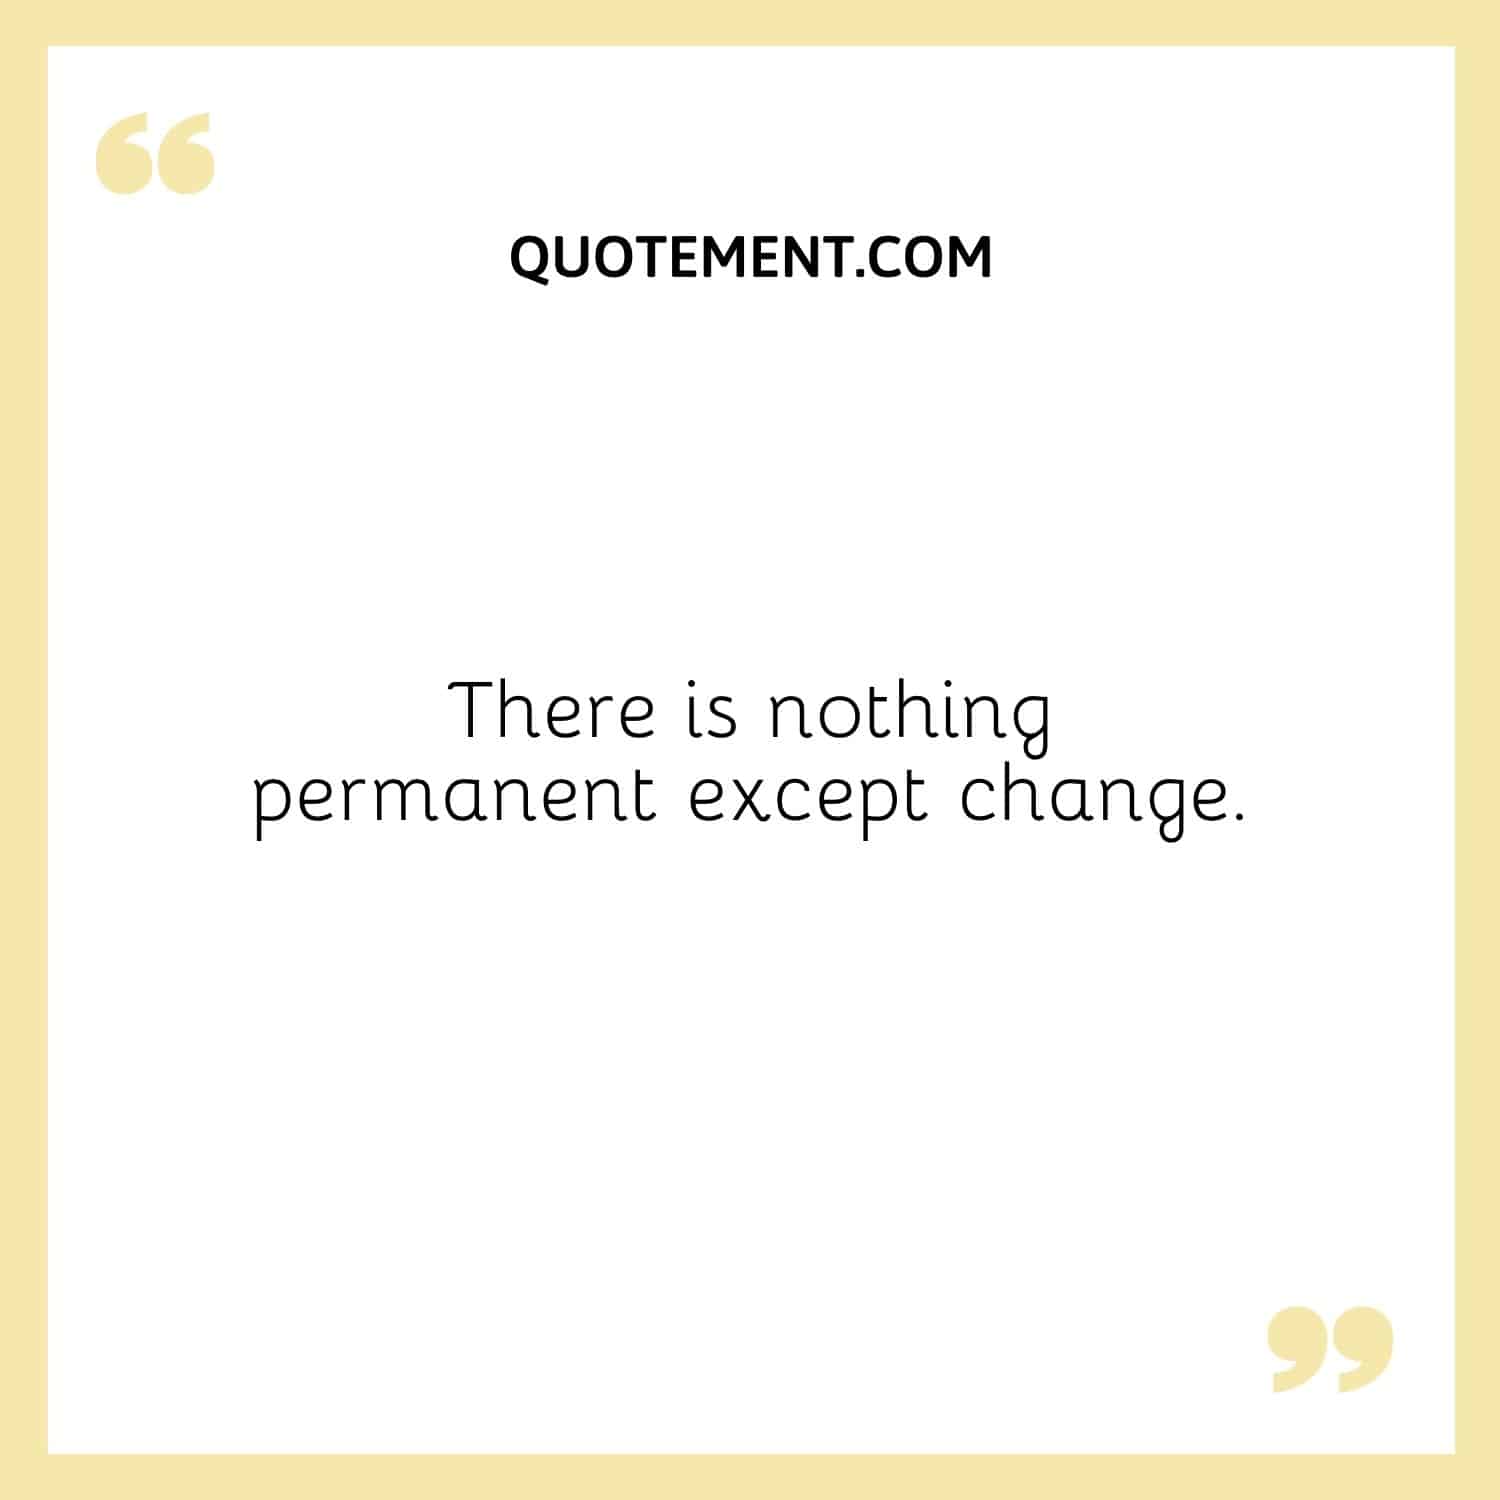 There is nothing permanent except change.